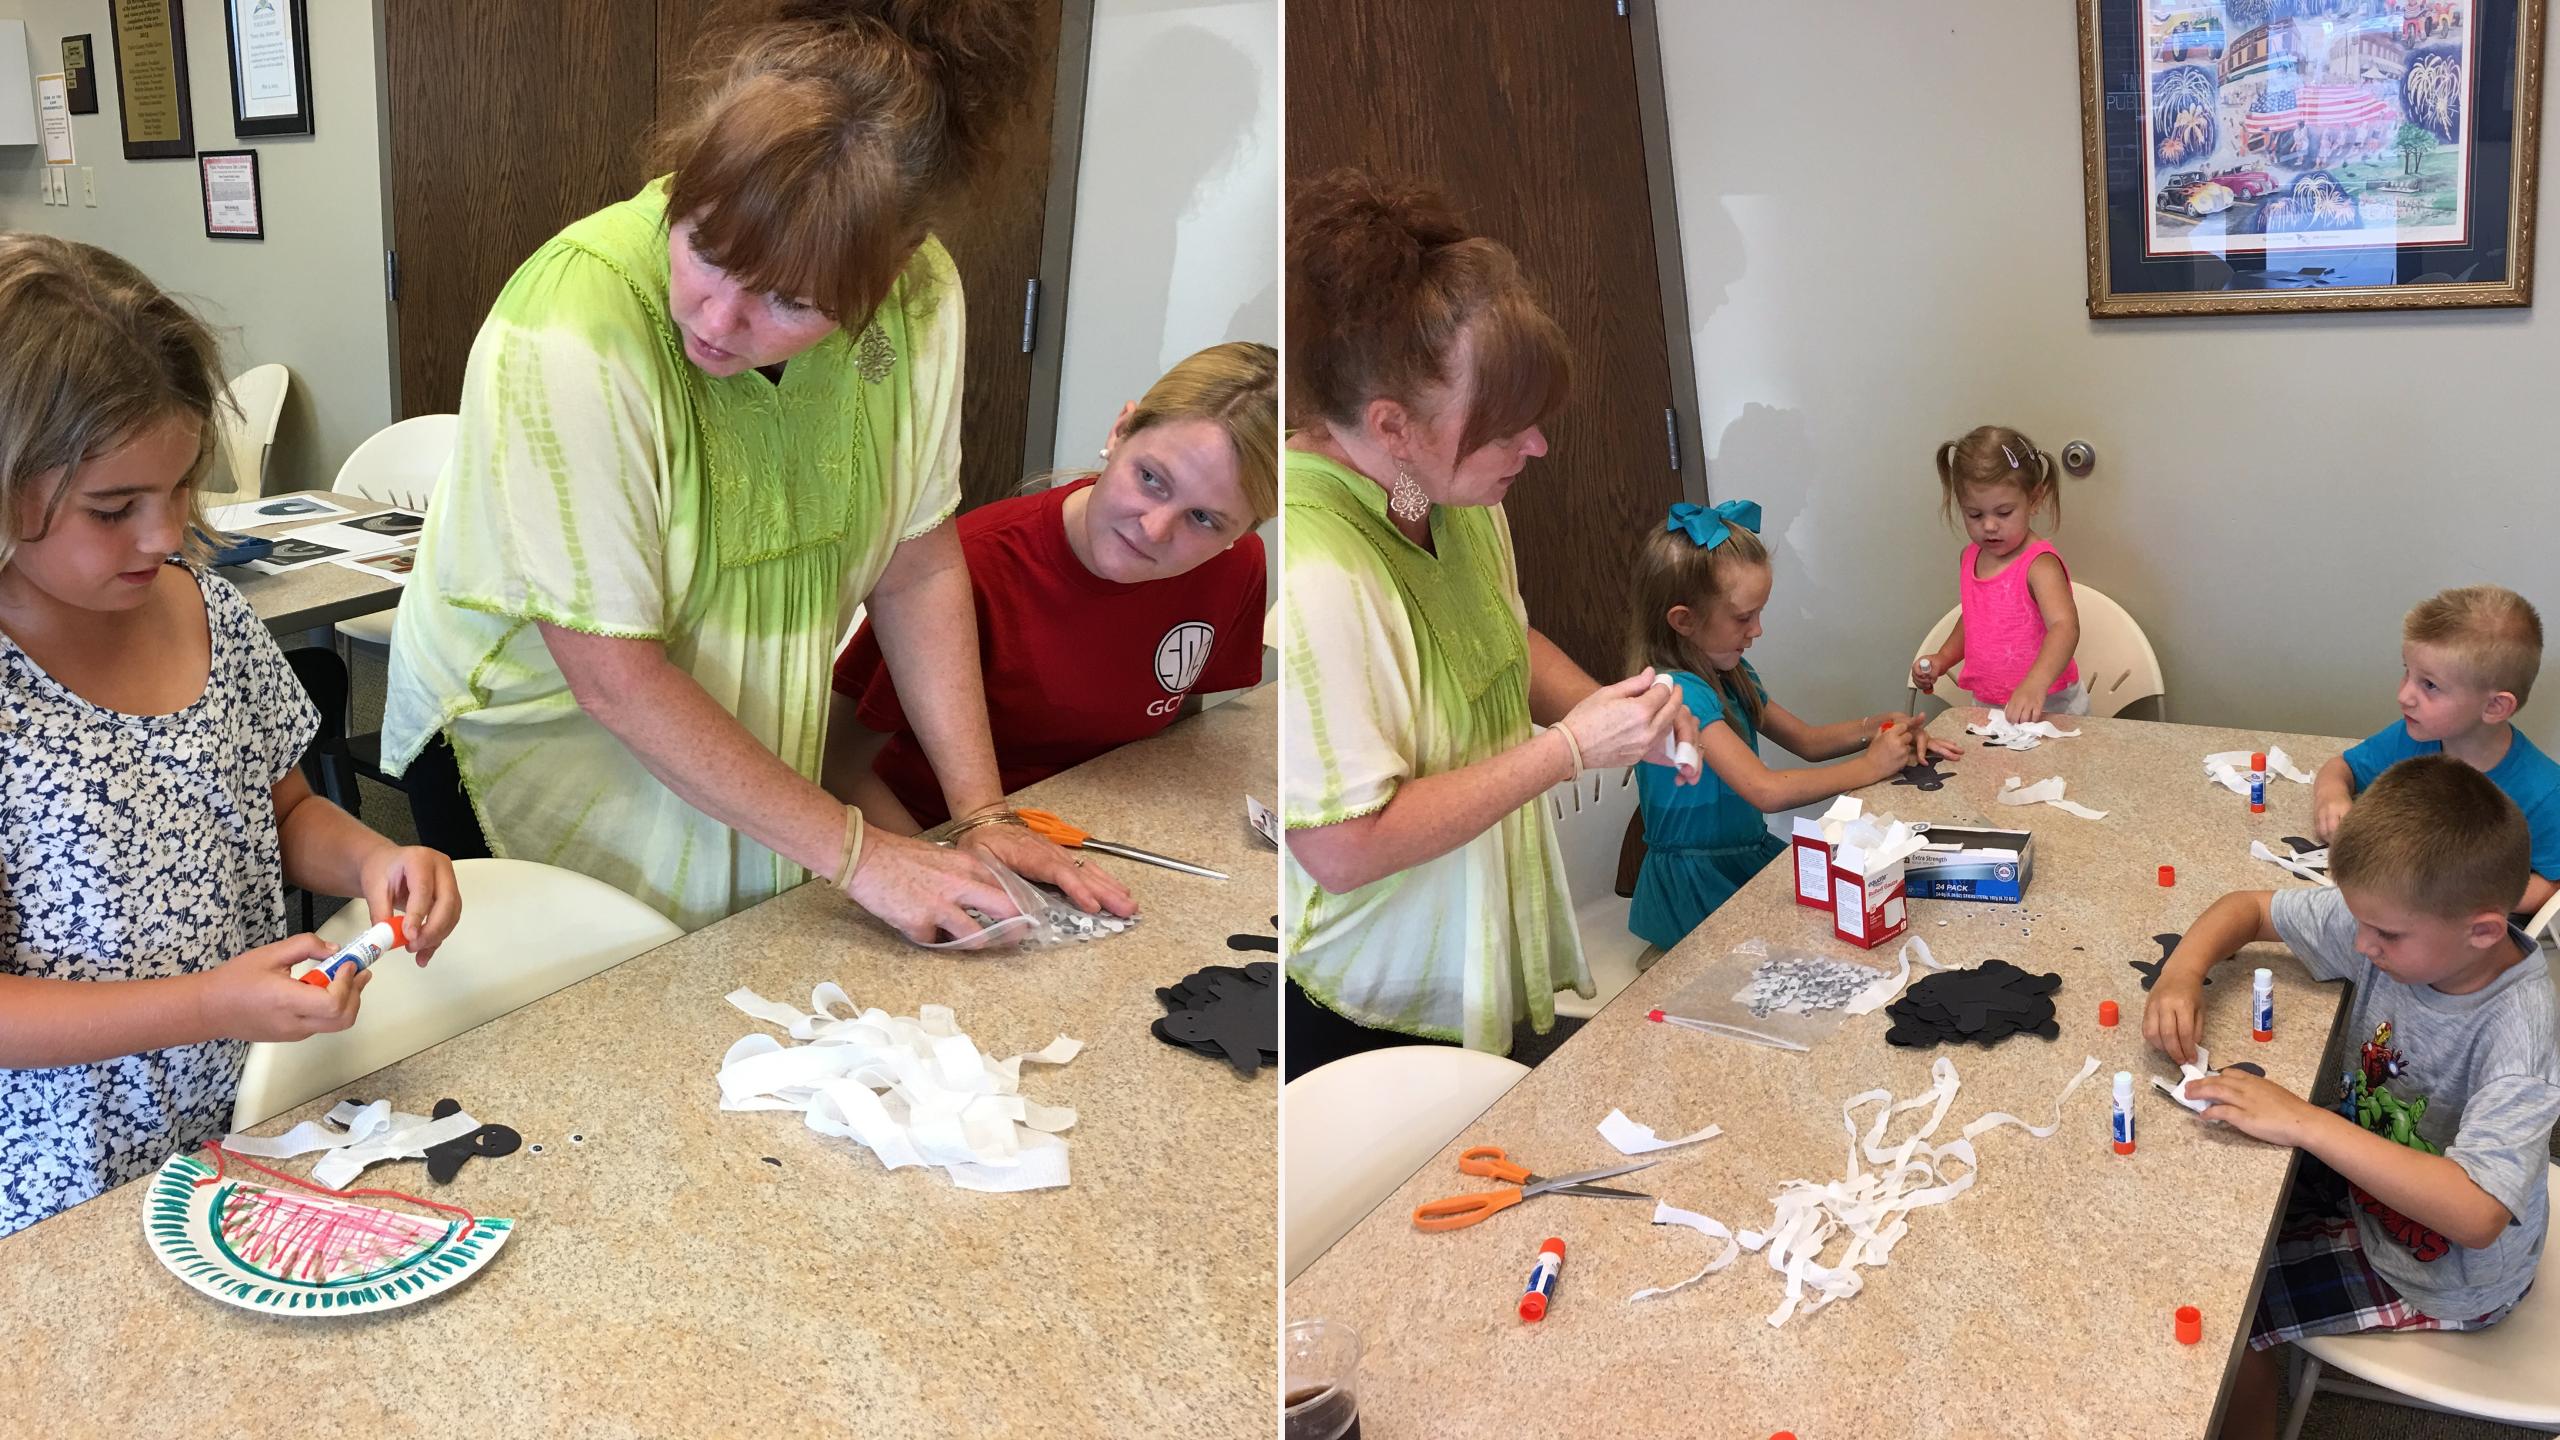 Campers at Taylor County Public Library